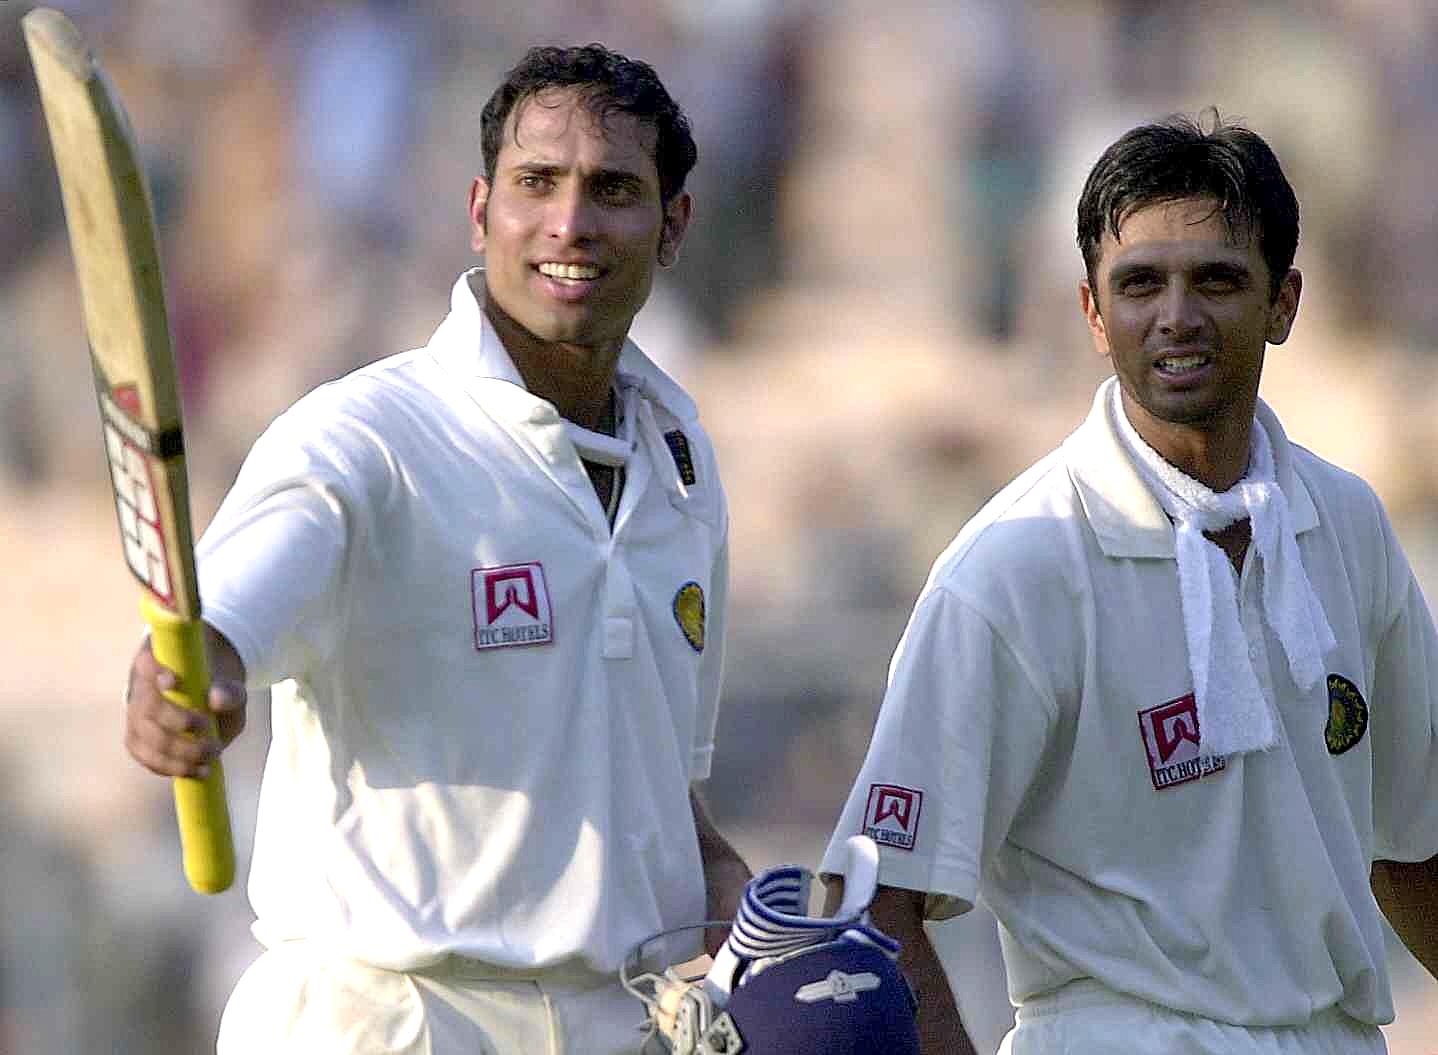 Cricketing Fraternity Pours Wishes As VVS Laxman Celebrates His 47th Birthday